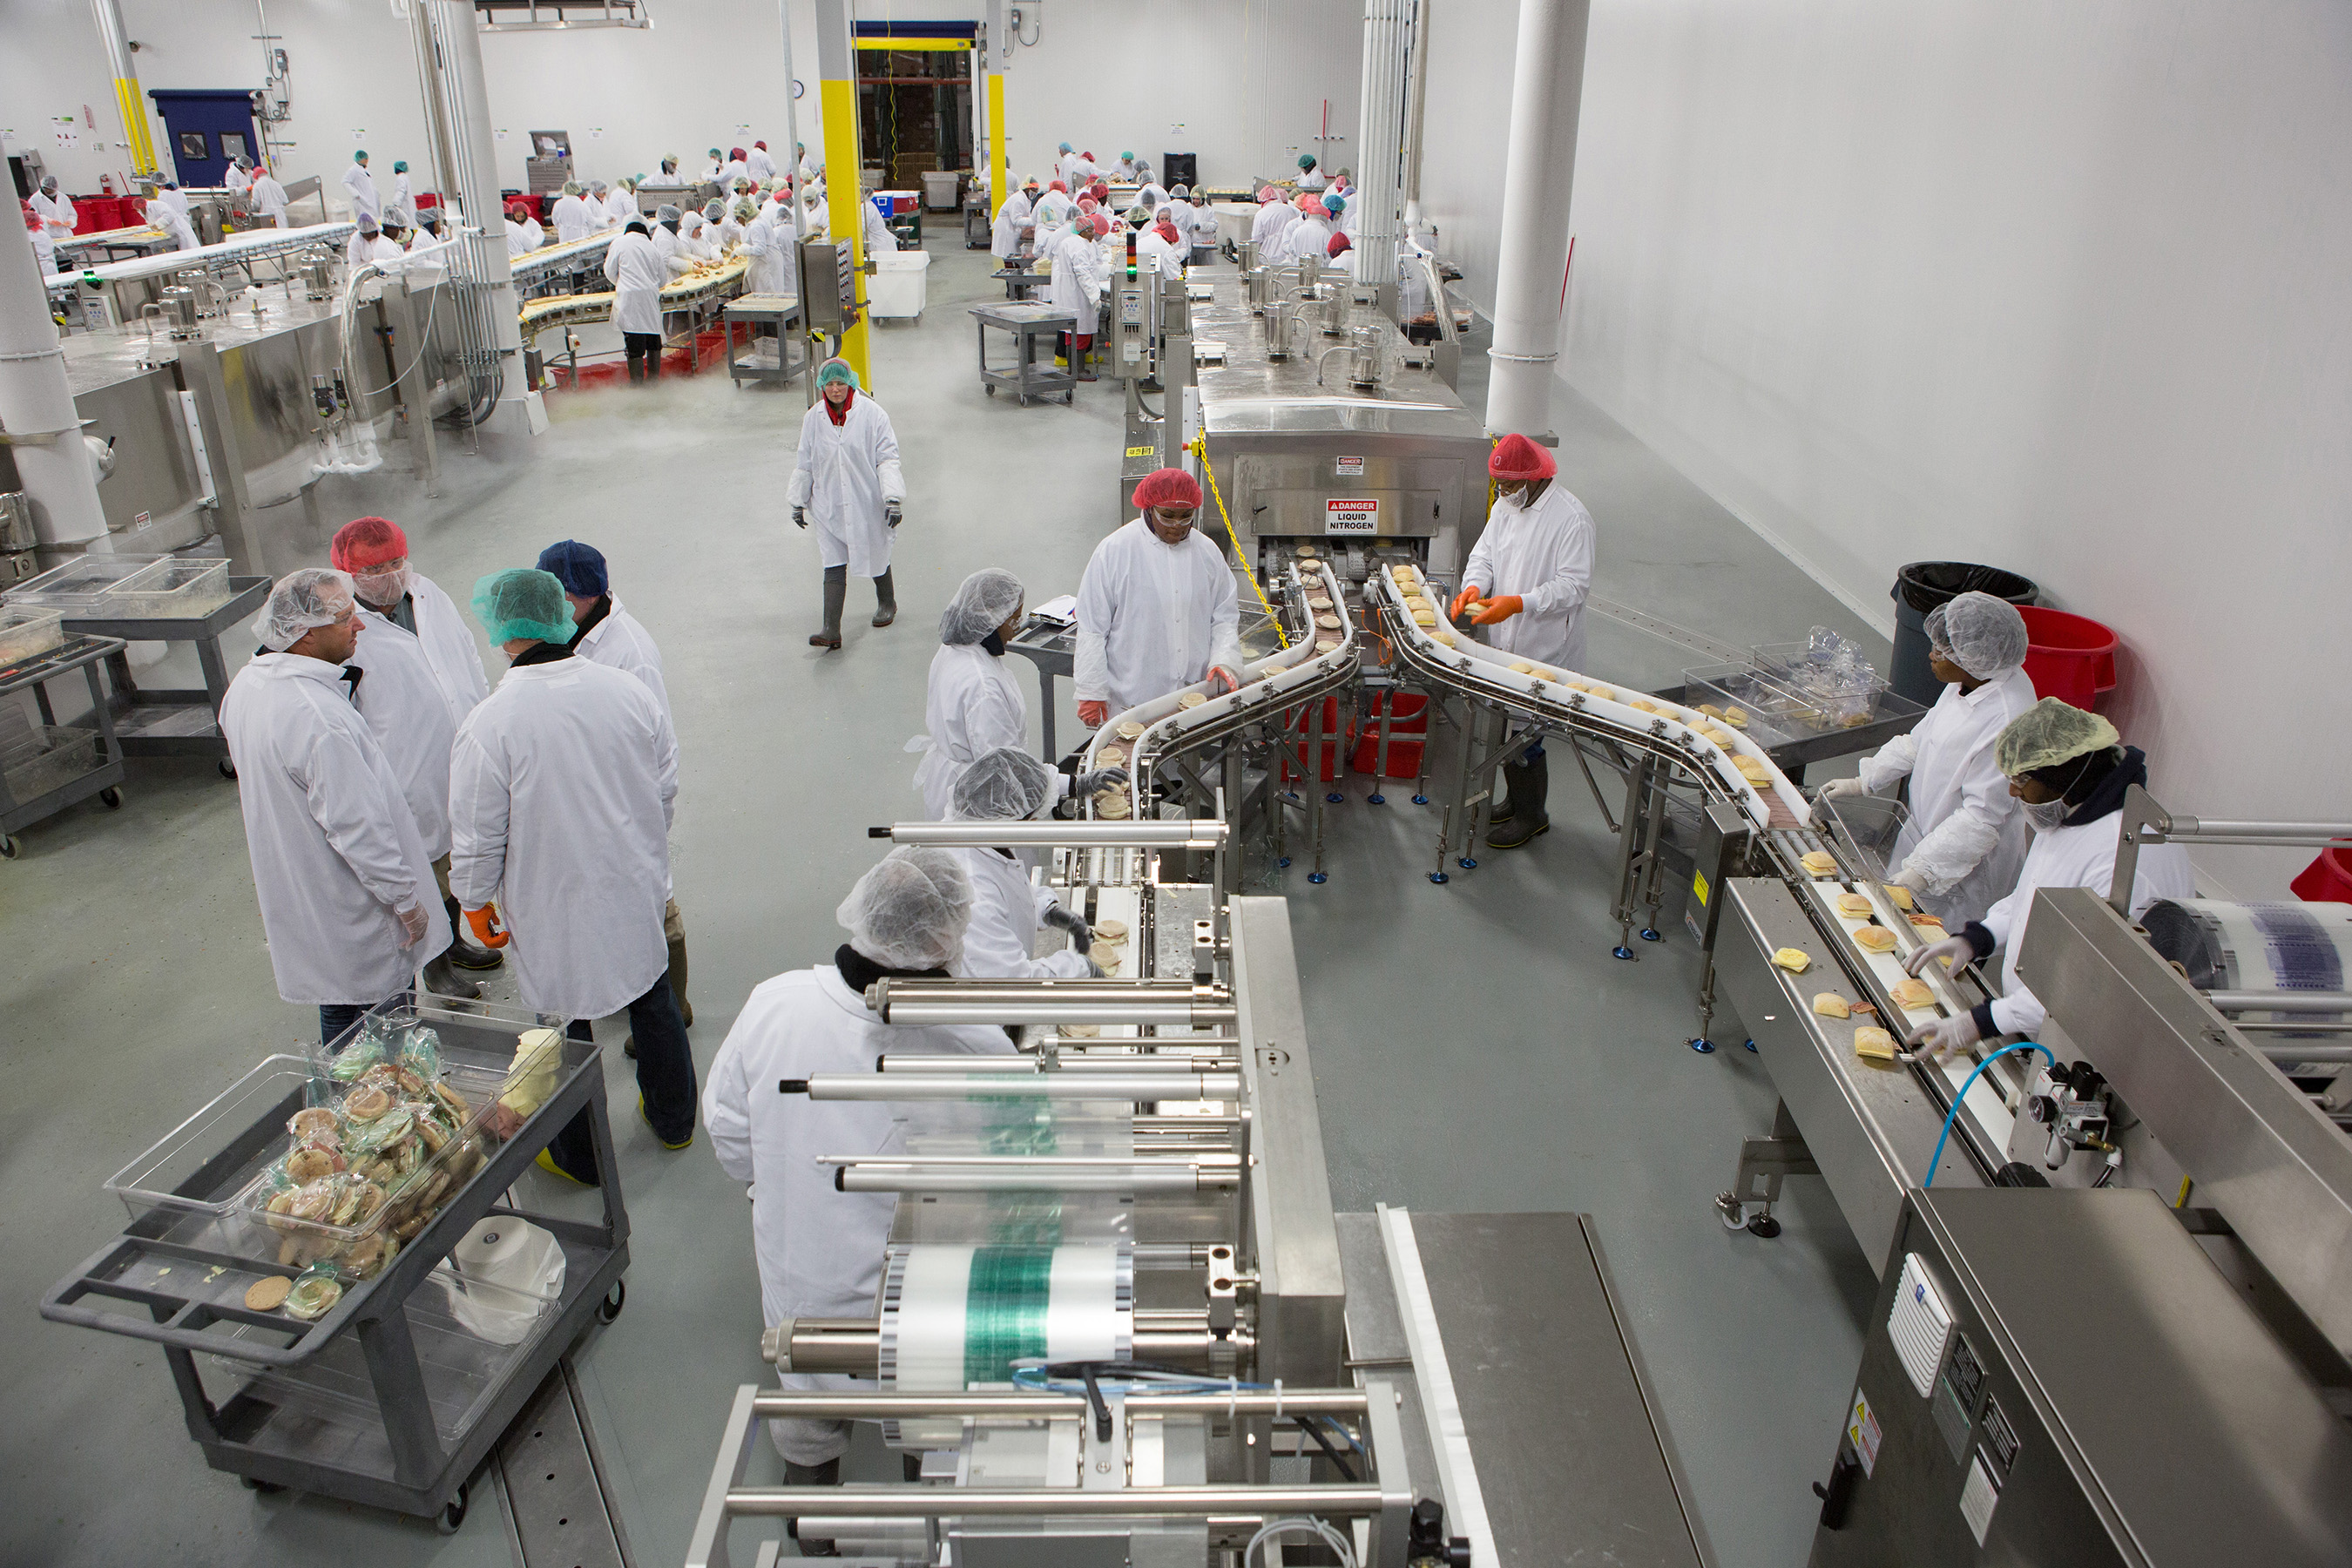 SK Food Group’s products undergo rigorous quality assurance checks prior to packaging at their new certified food assembly facility in Groveport, OH